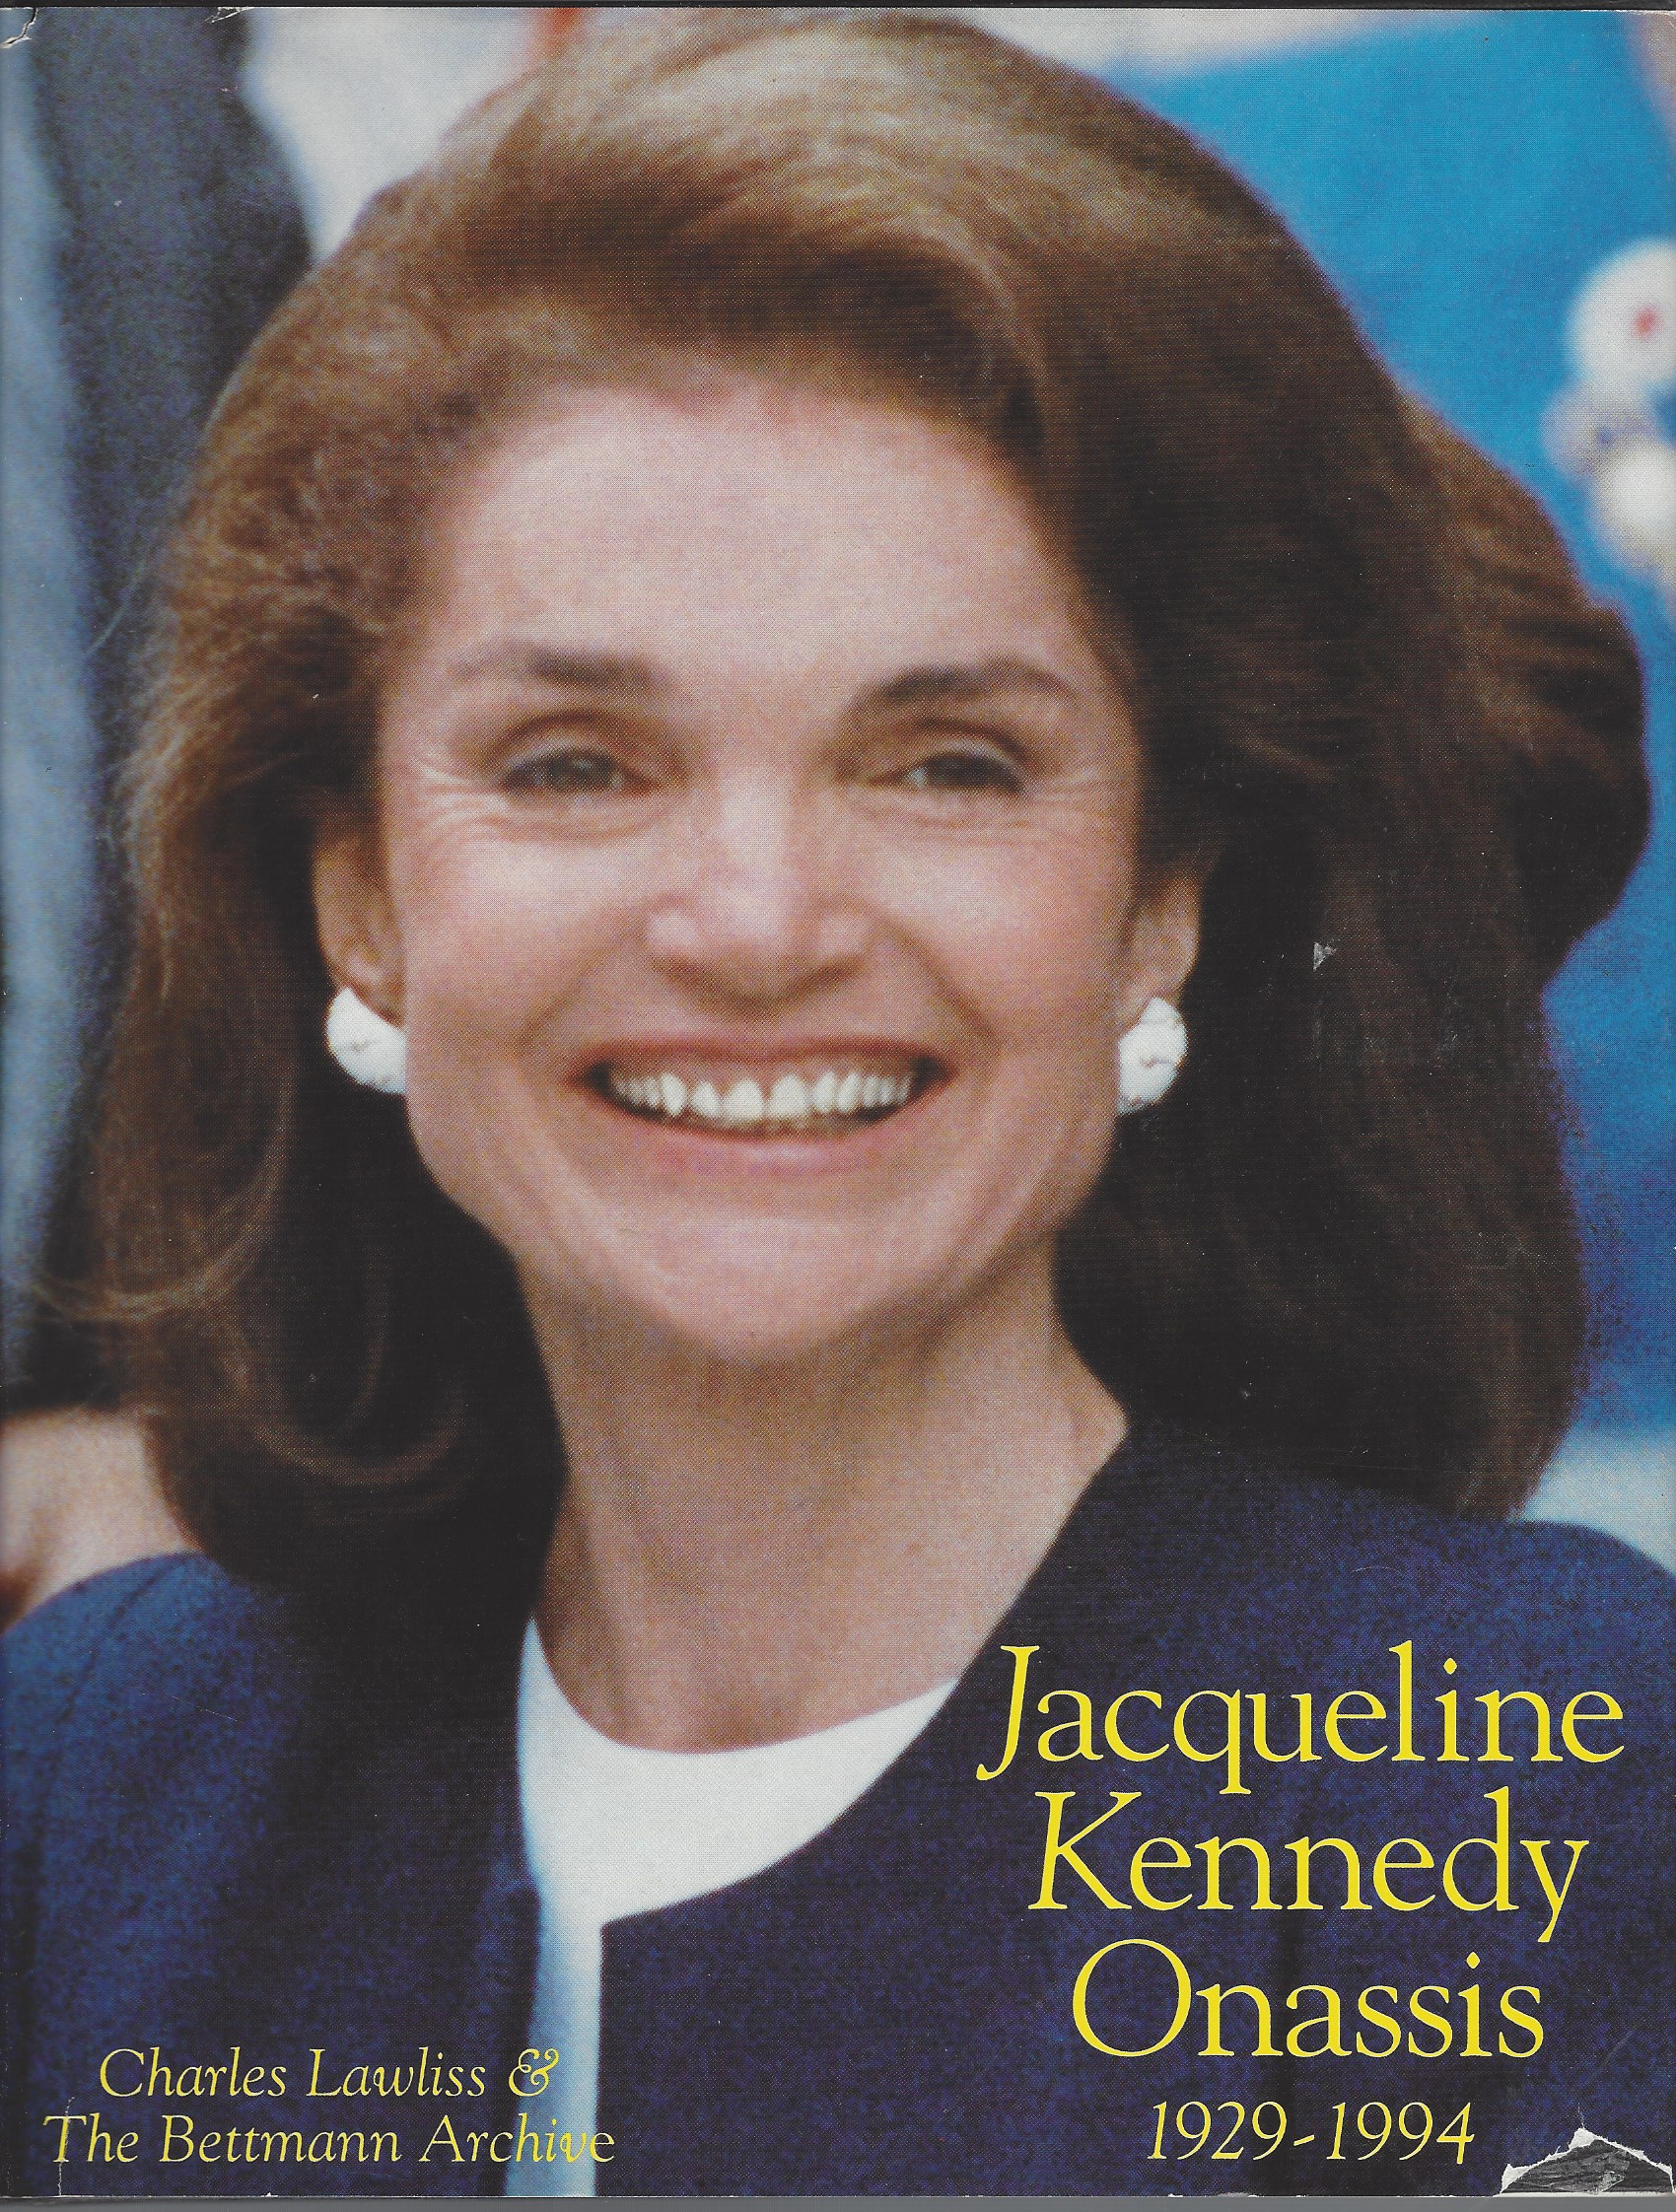 LAWLISS CHARLES & THE BETTMANN ARCHIVE - Jacqueline Kennedy Onassis (1929-1994)